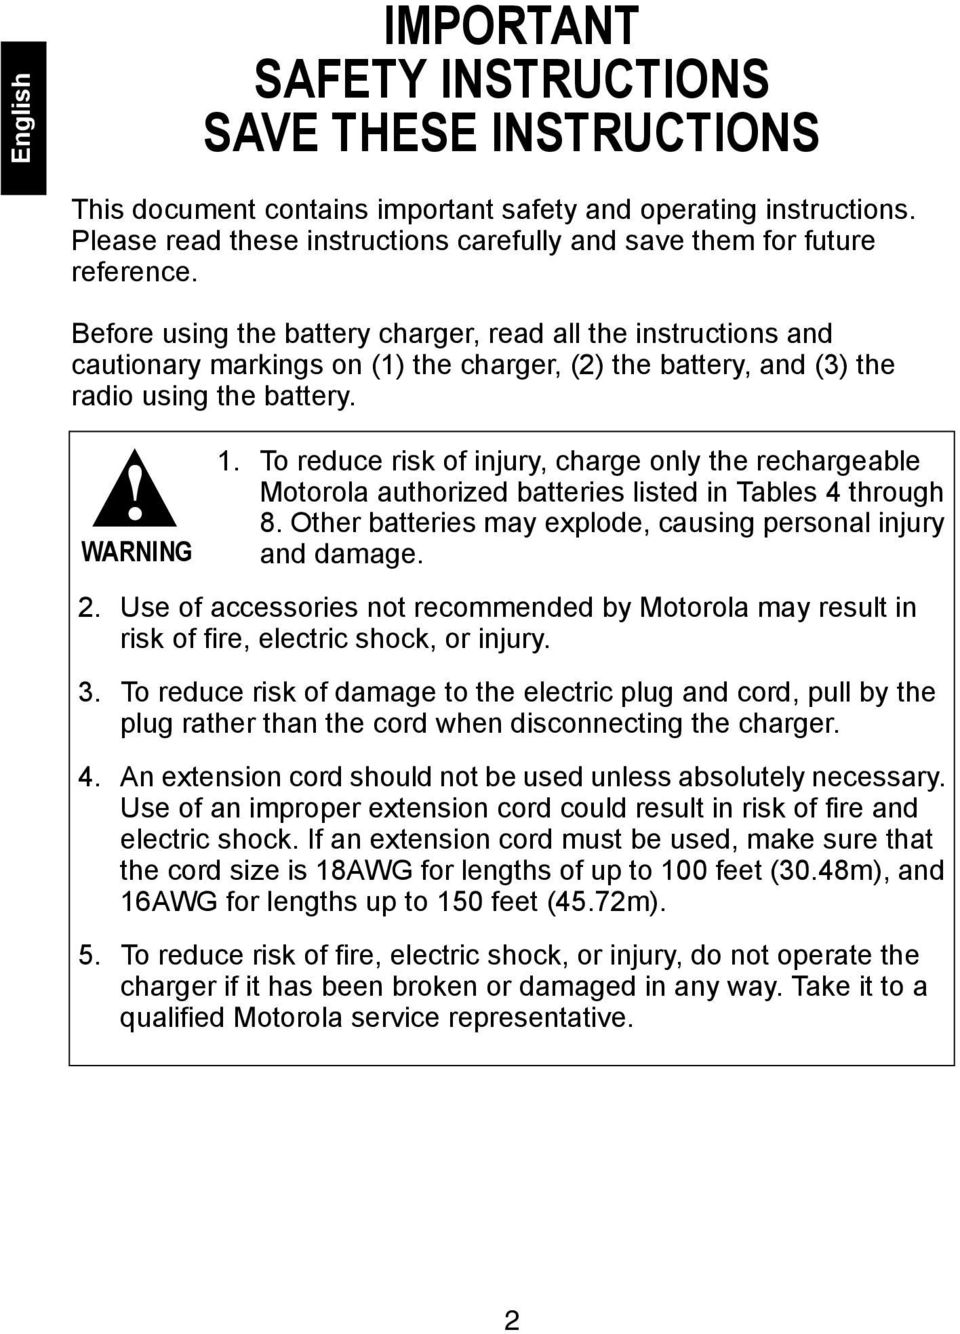 Before using the battery charger, read all the instructions and cautionary markings on (1) the charger, (2) the battery, and (3) the radio using the battery.! WARNING 1.